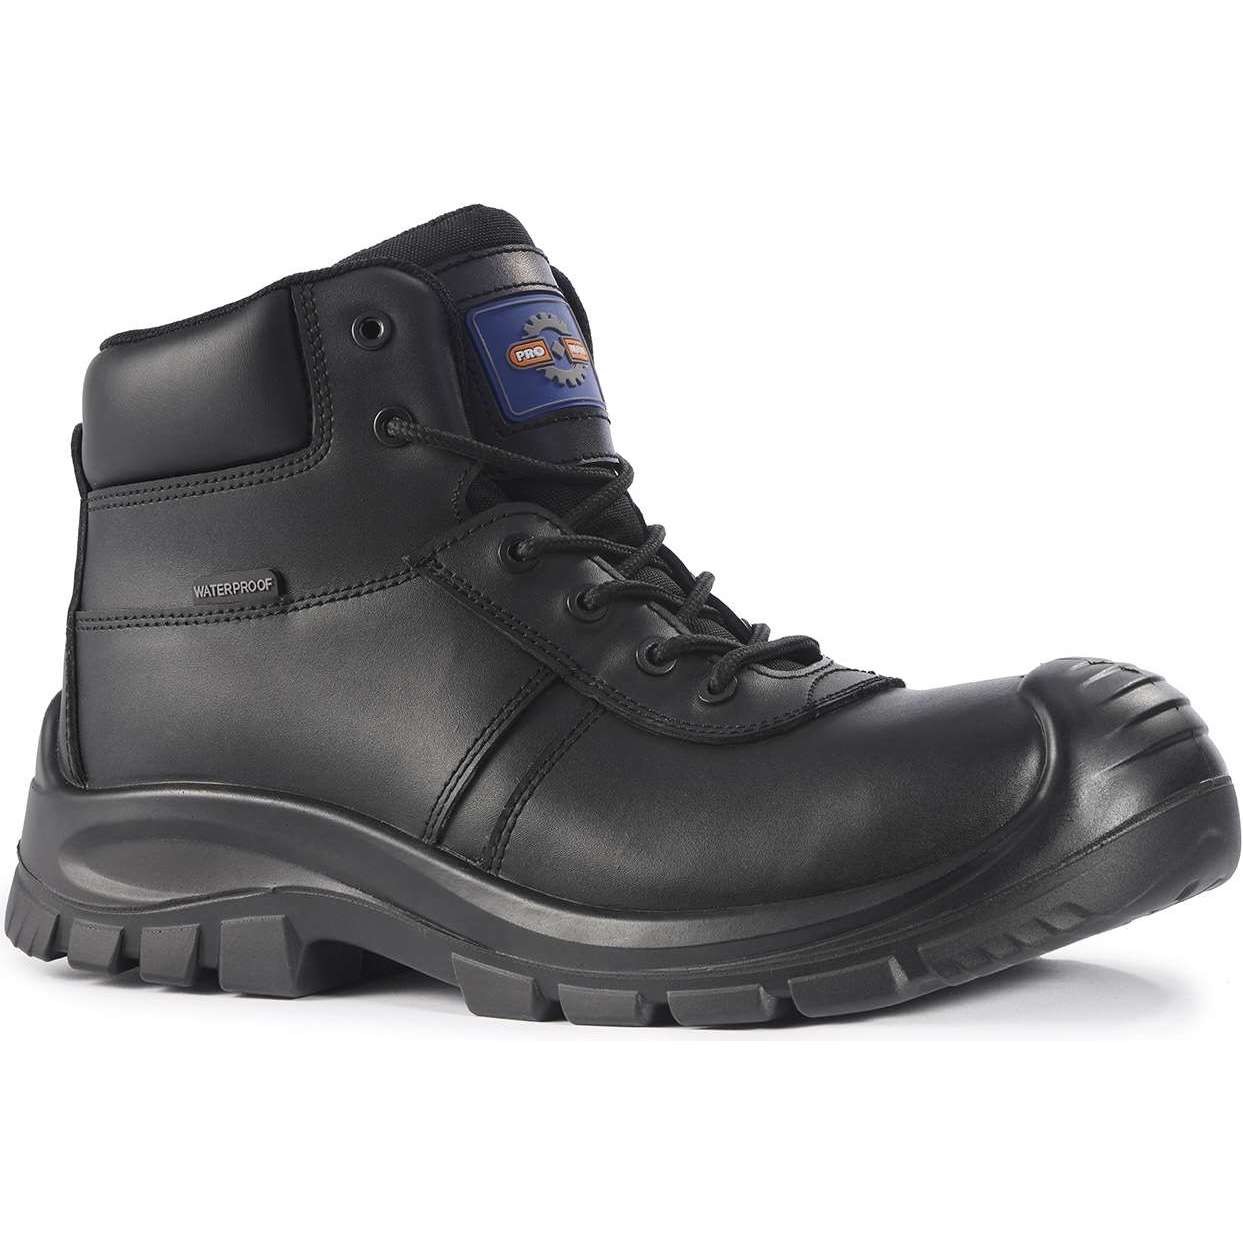 Pro Man Baltimore Waterproof S3 Safety Boots